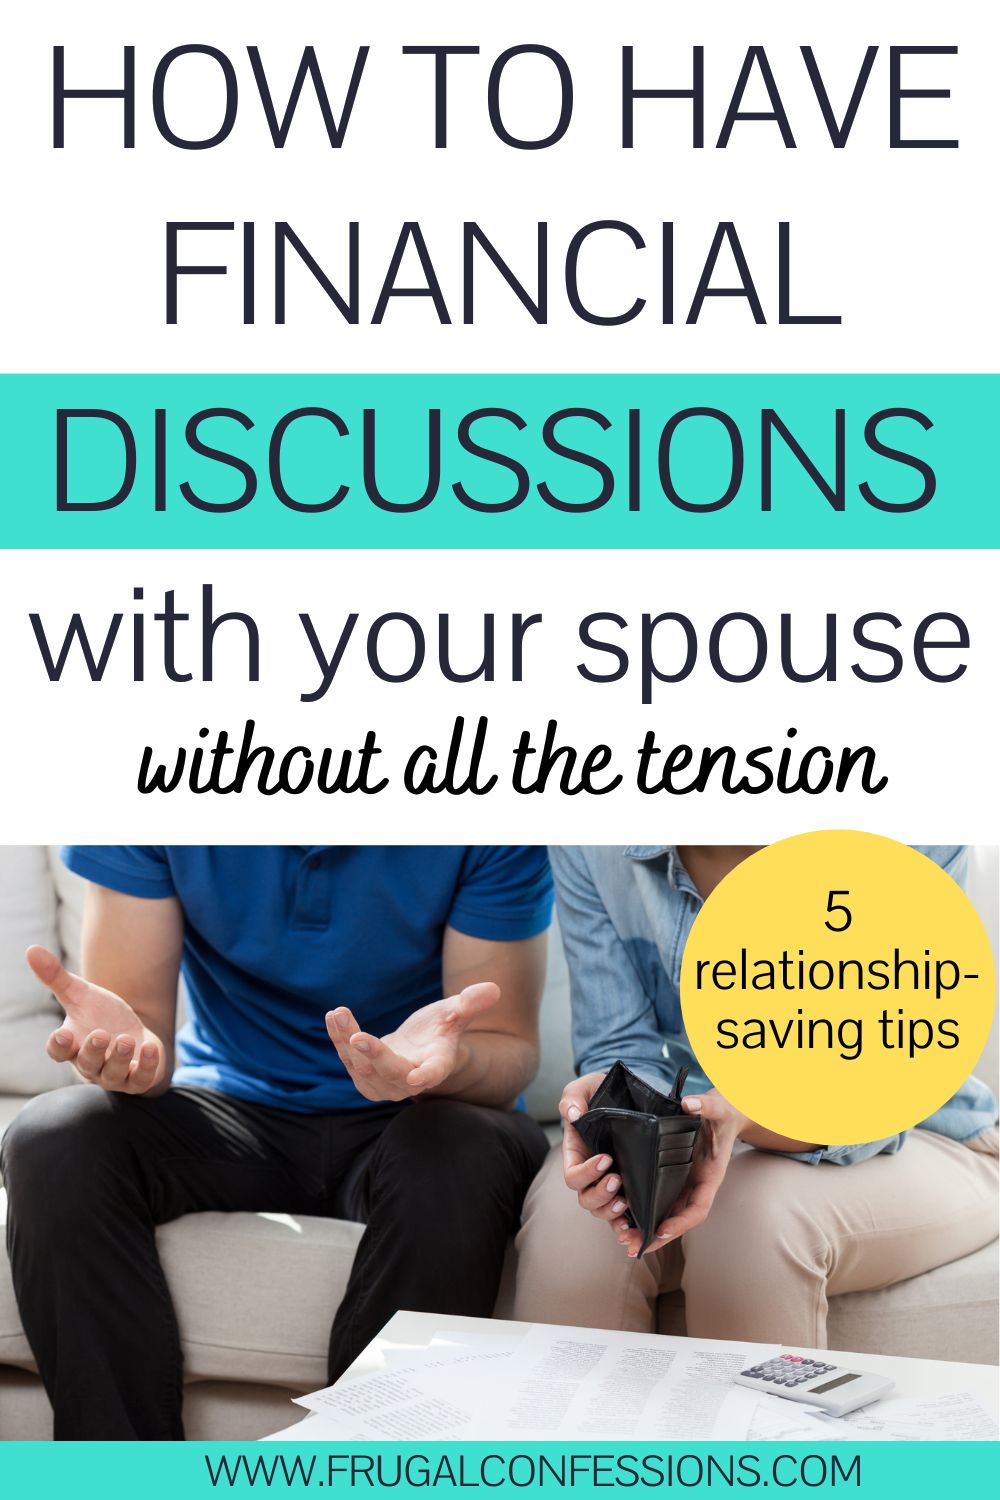 couple having money talk at coffee table, text overlay "how to have financial discussions with your spouse"